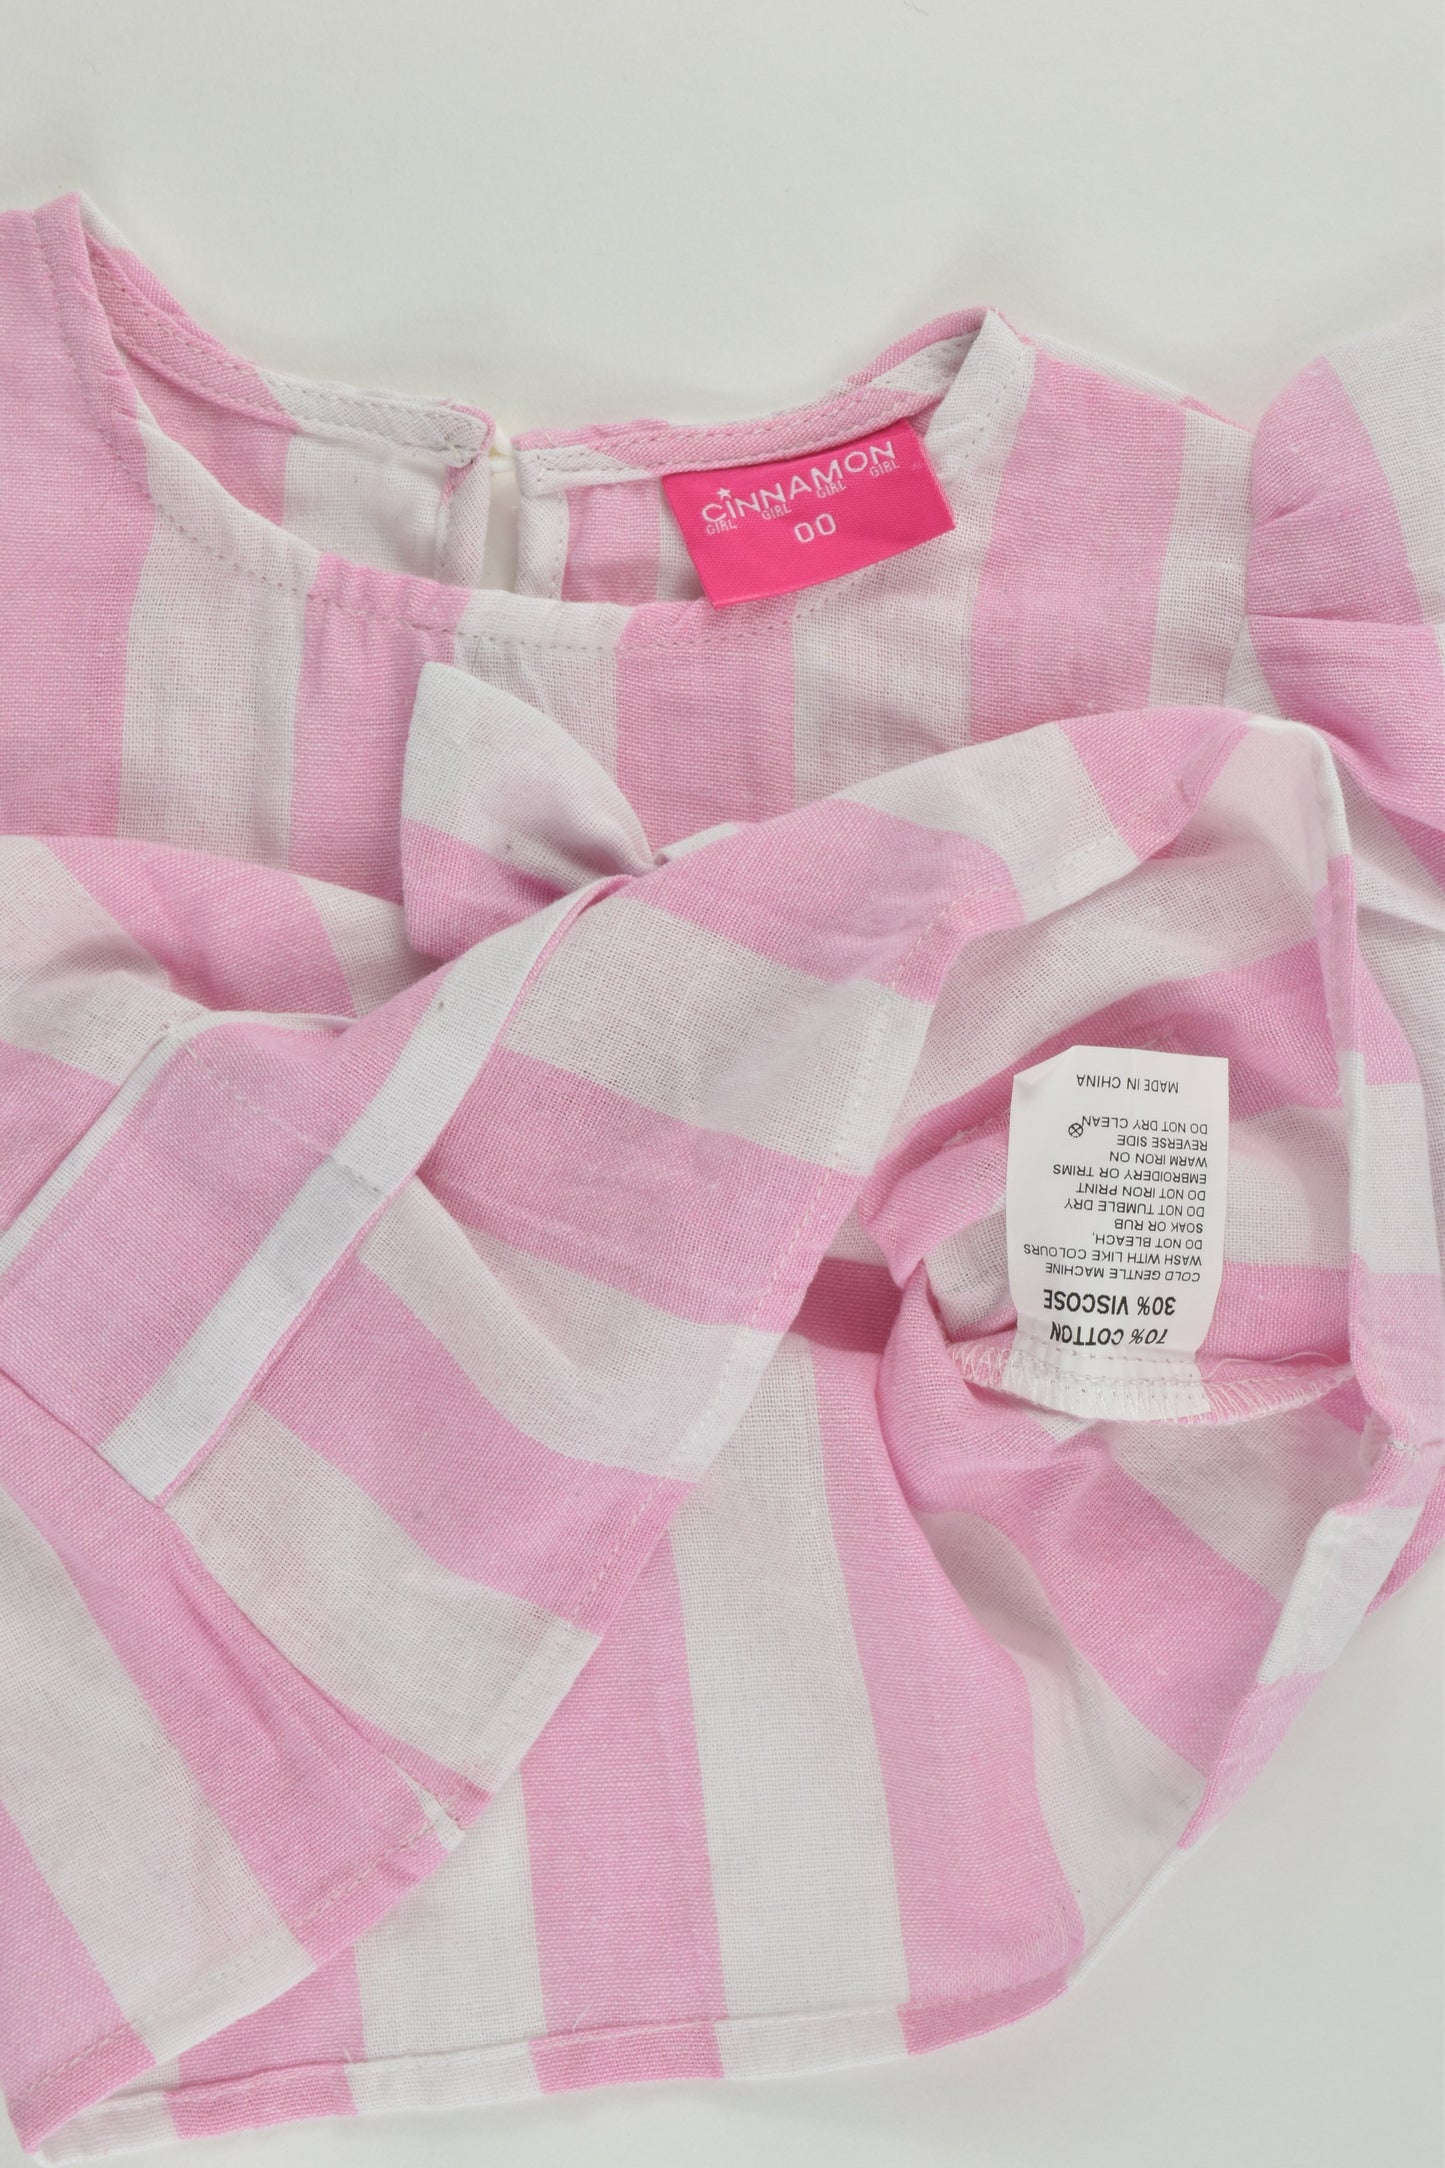 NEW Cinnamon Girl Size 00 Pink Stripes Top